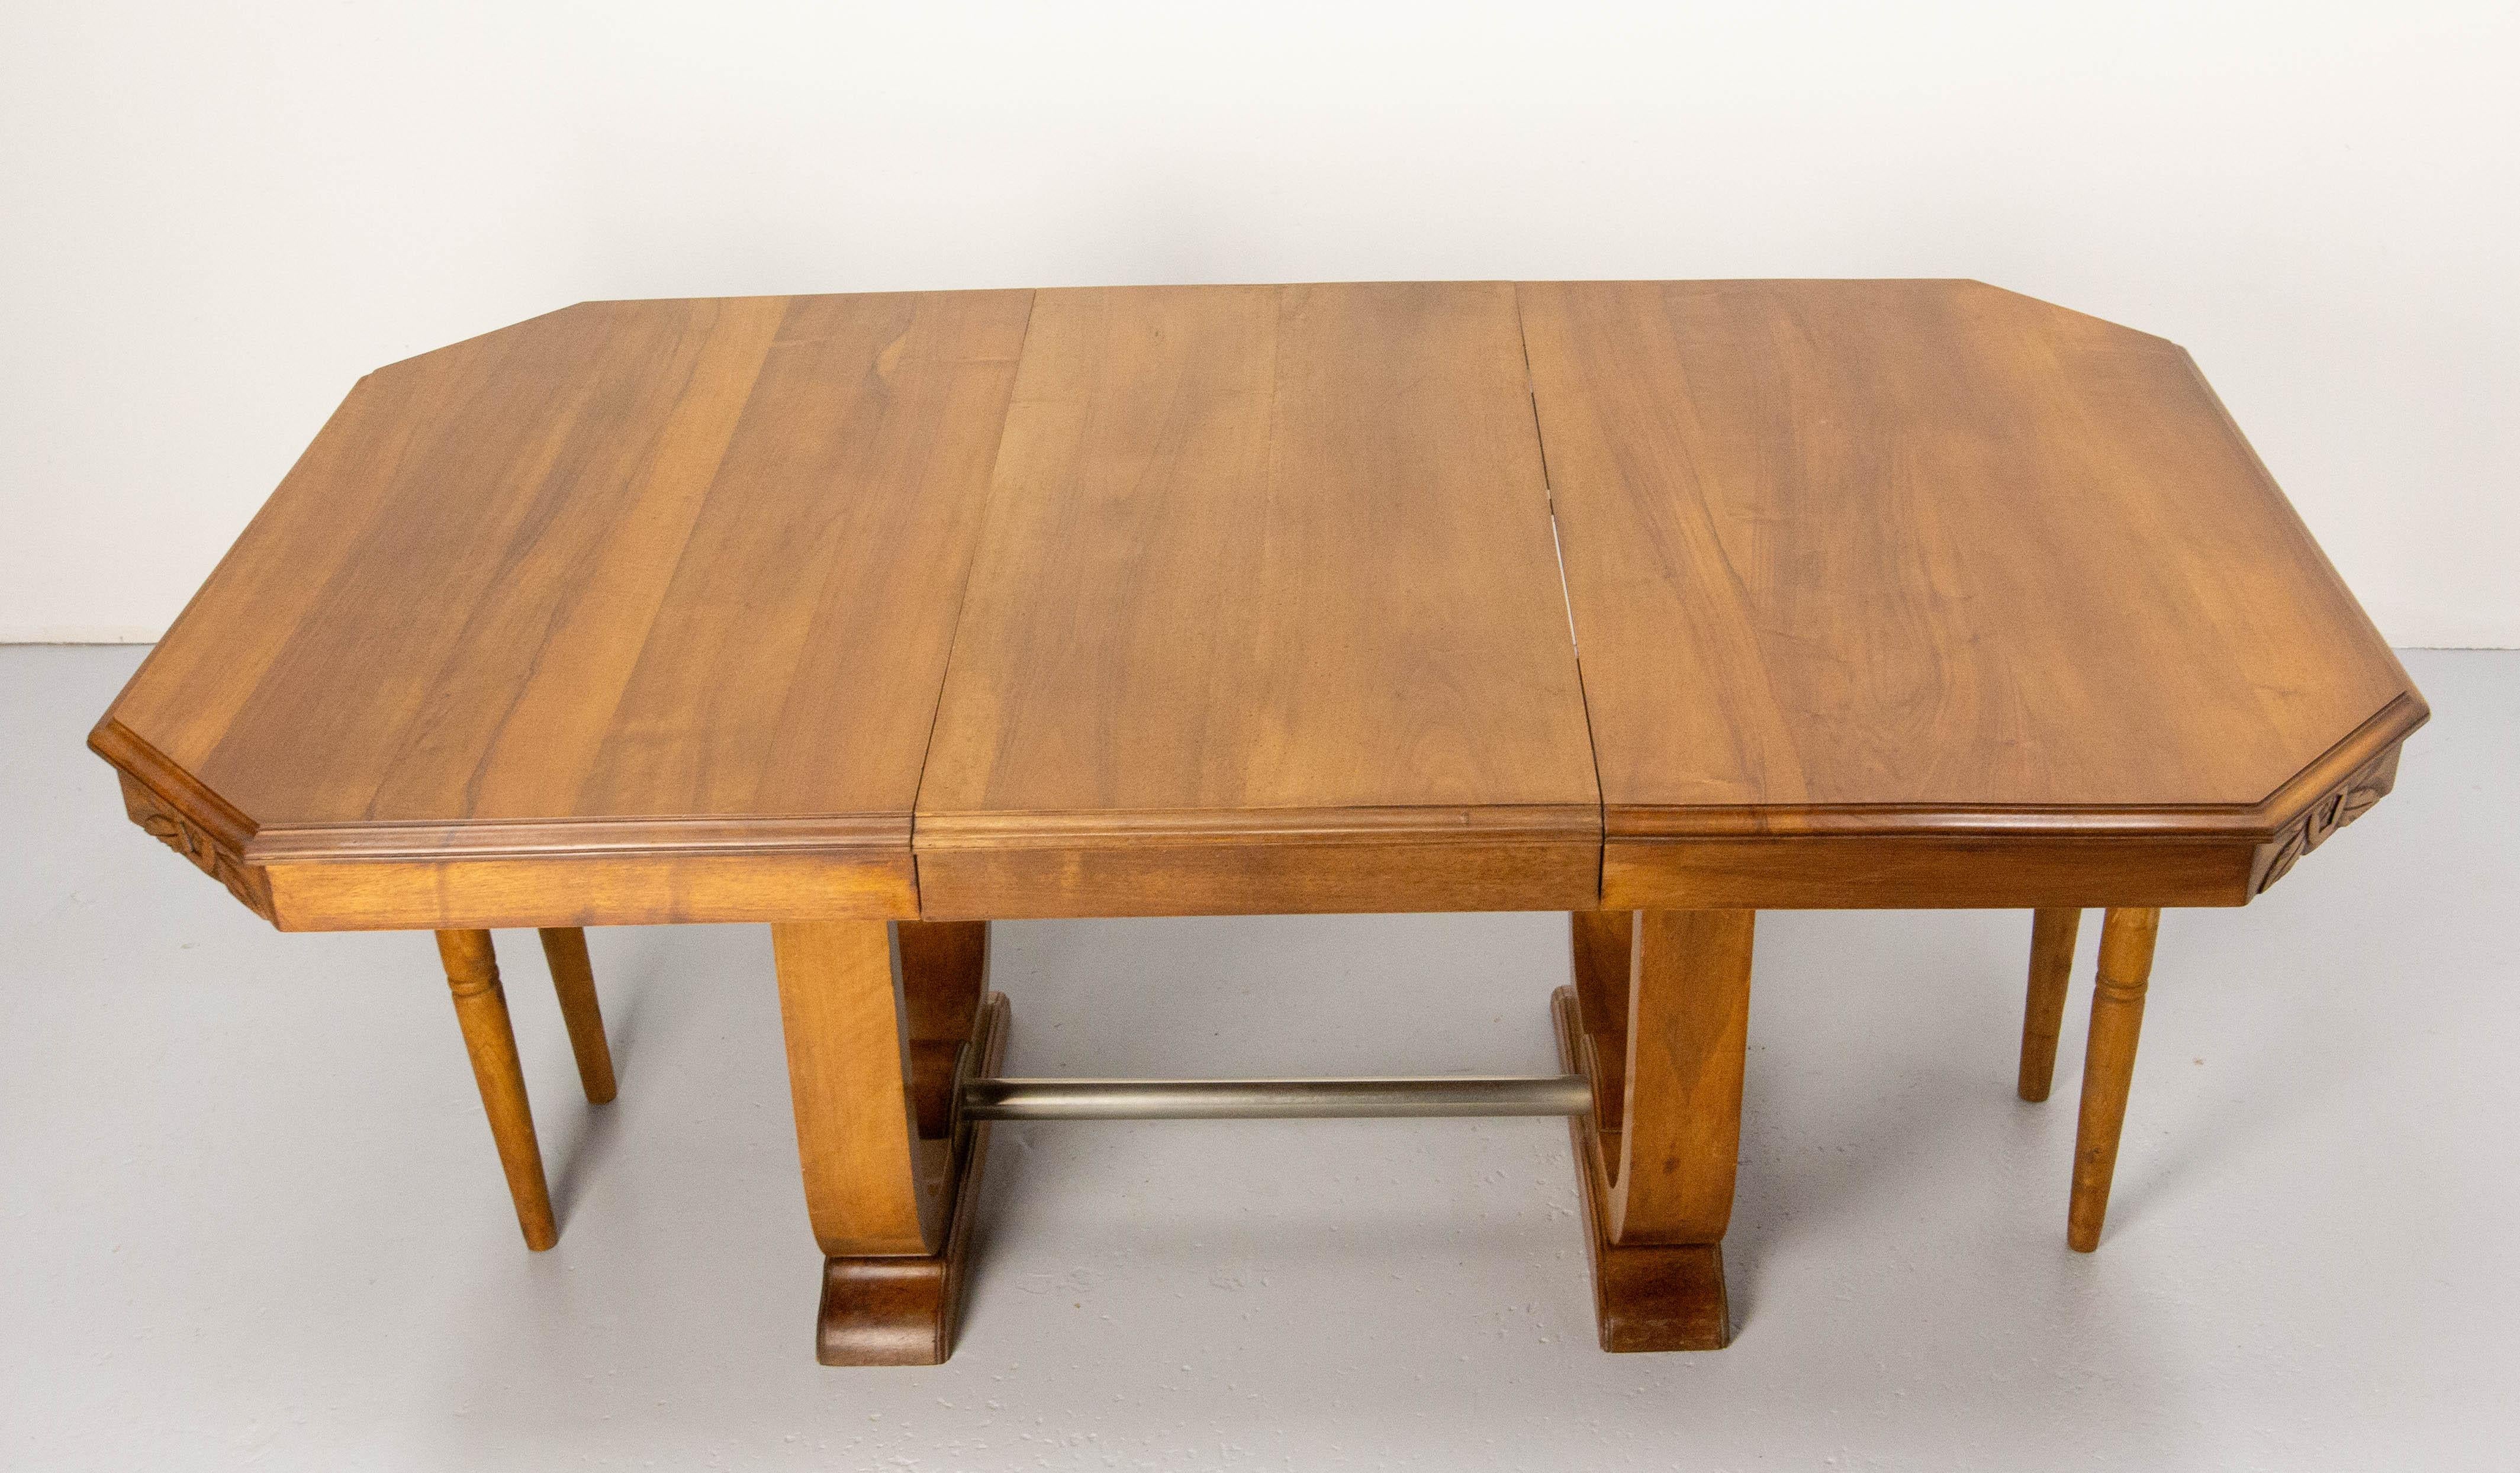 Mid-20th Century Dining Walnut Table with Central Extension  Art Déco Period, circa 1930 France For Sale